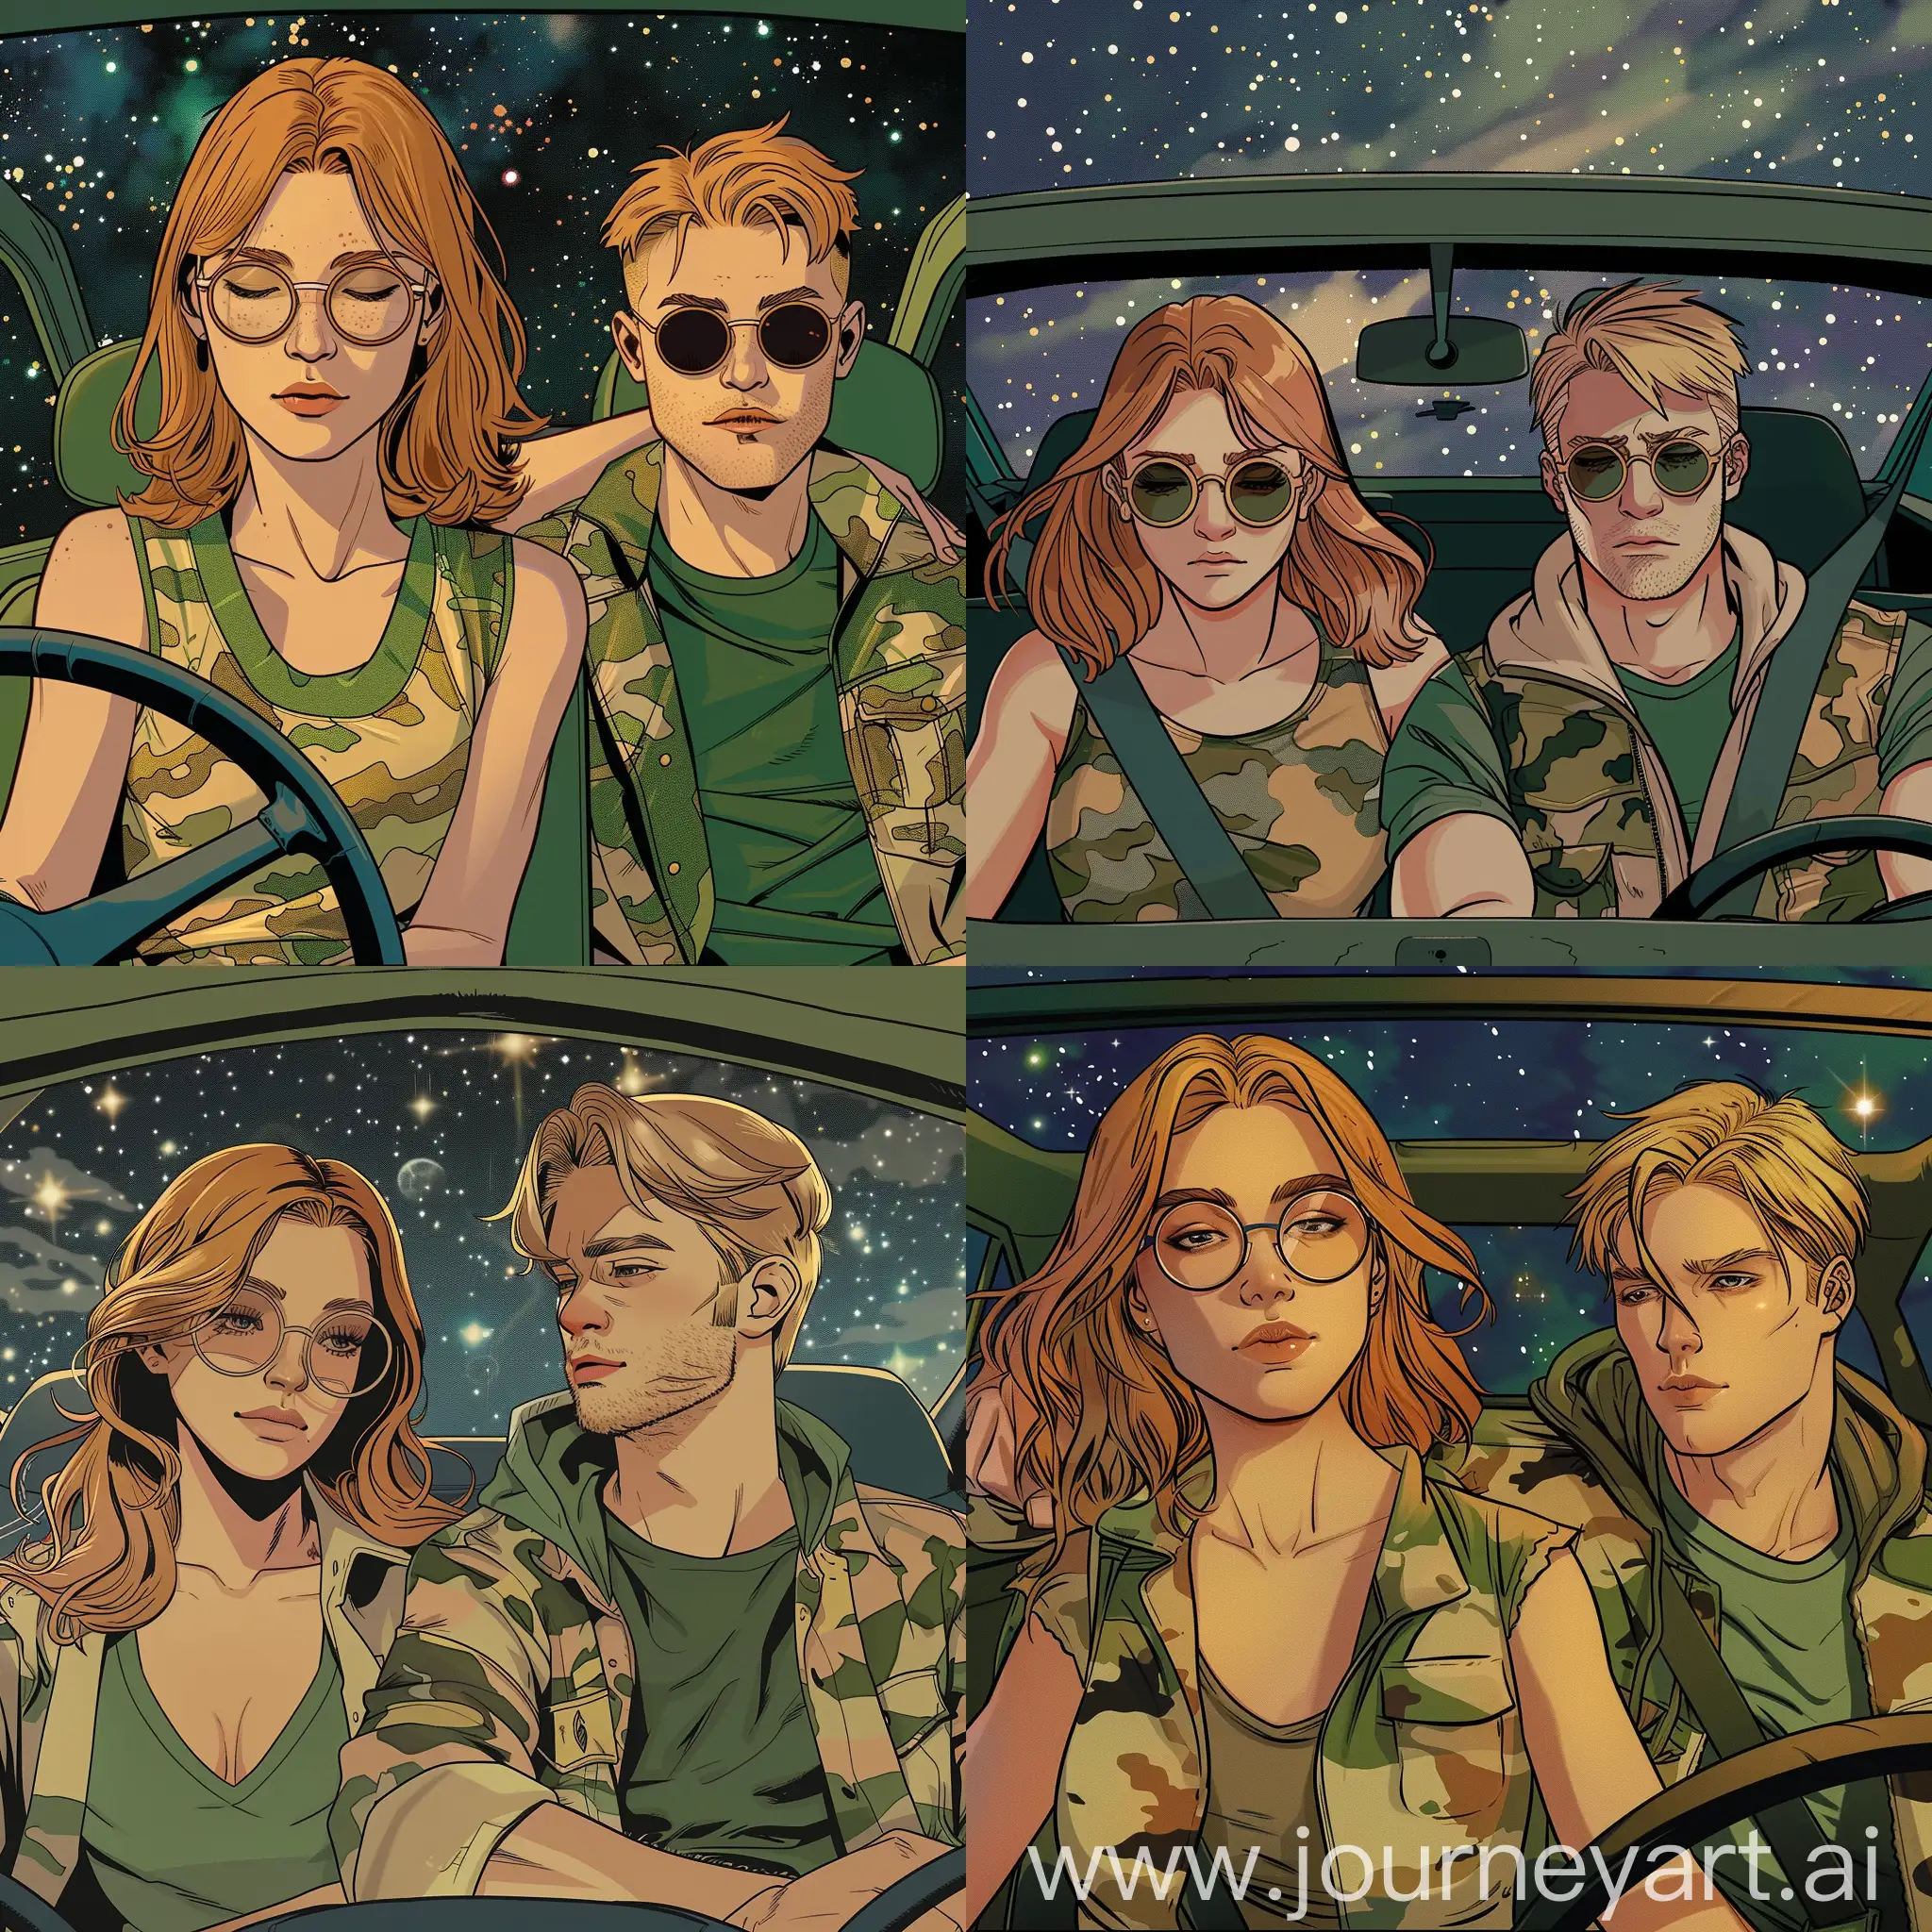 Young-Woman-with-Ginger-Hair-Driving-Car-at-Starry-Night-Marvel-Comic-Style